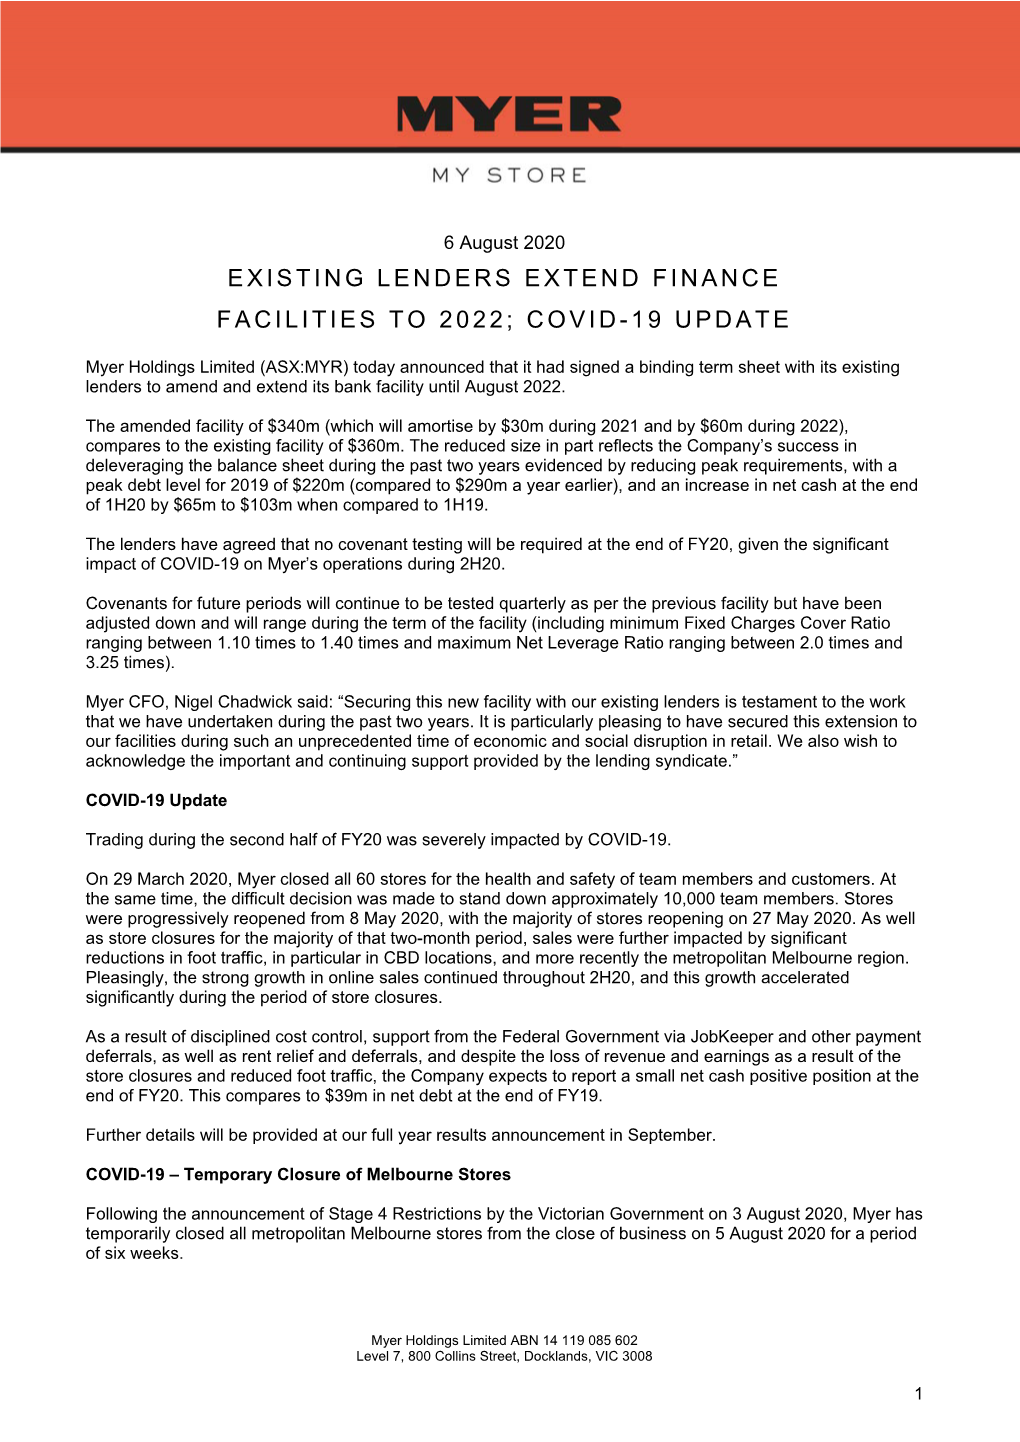 Existing Lenders Extend Finance Facilities & COVID-19 Update